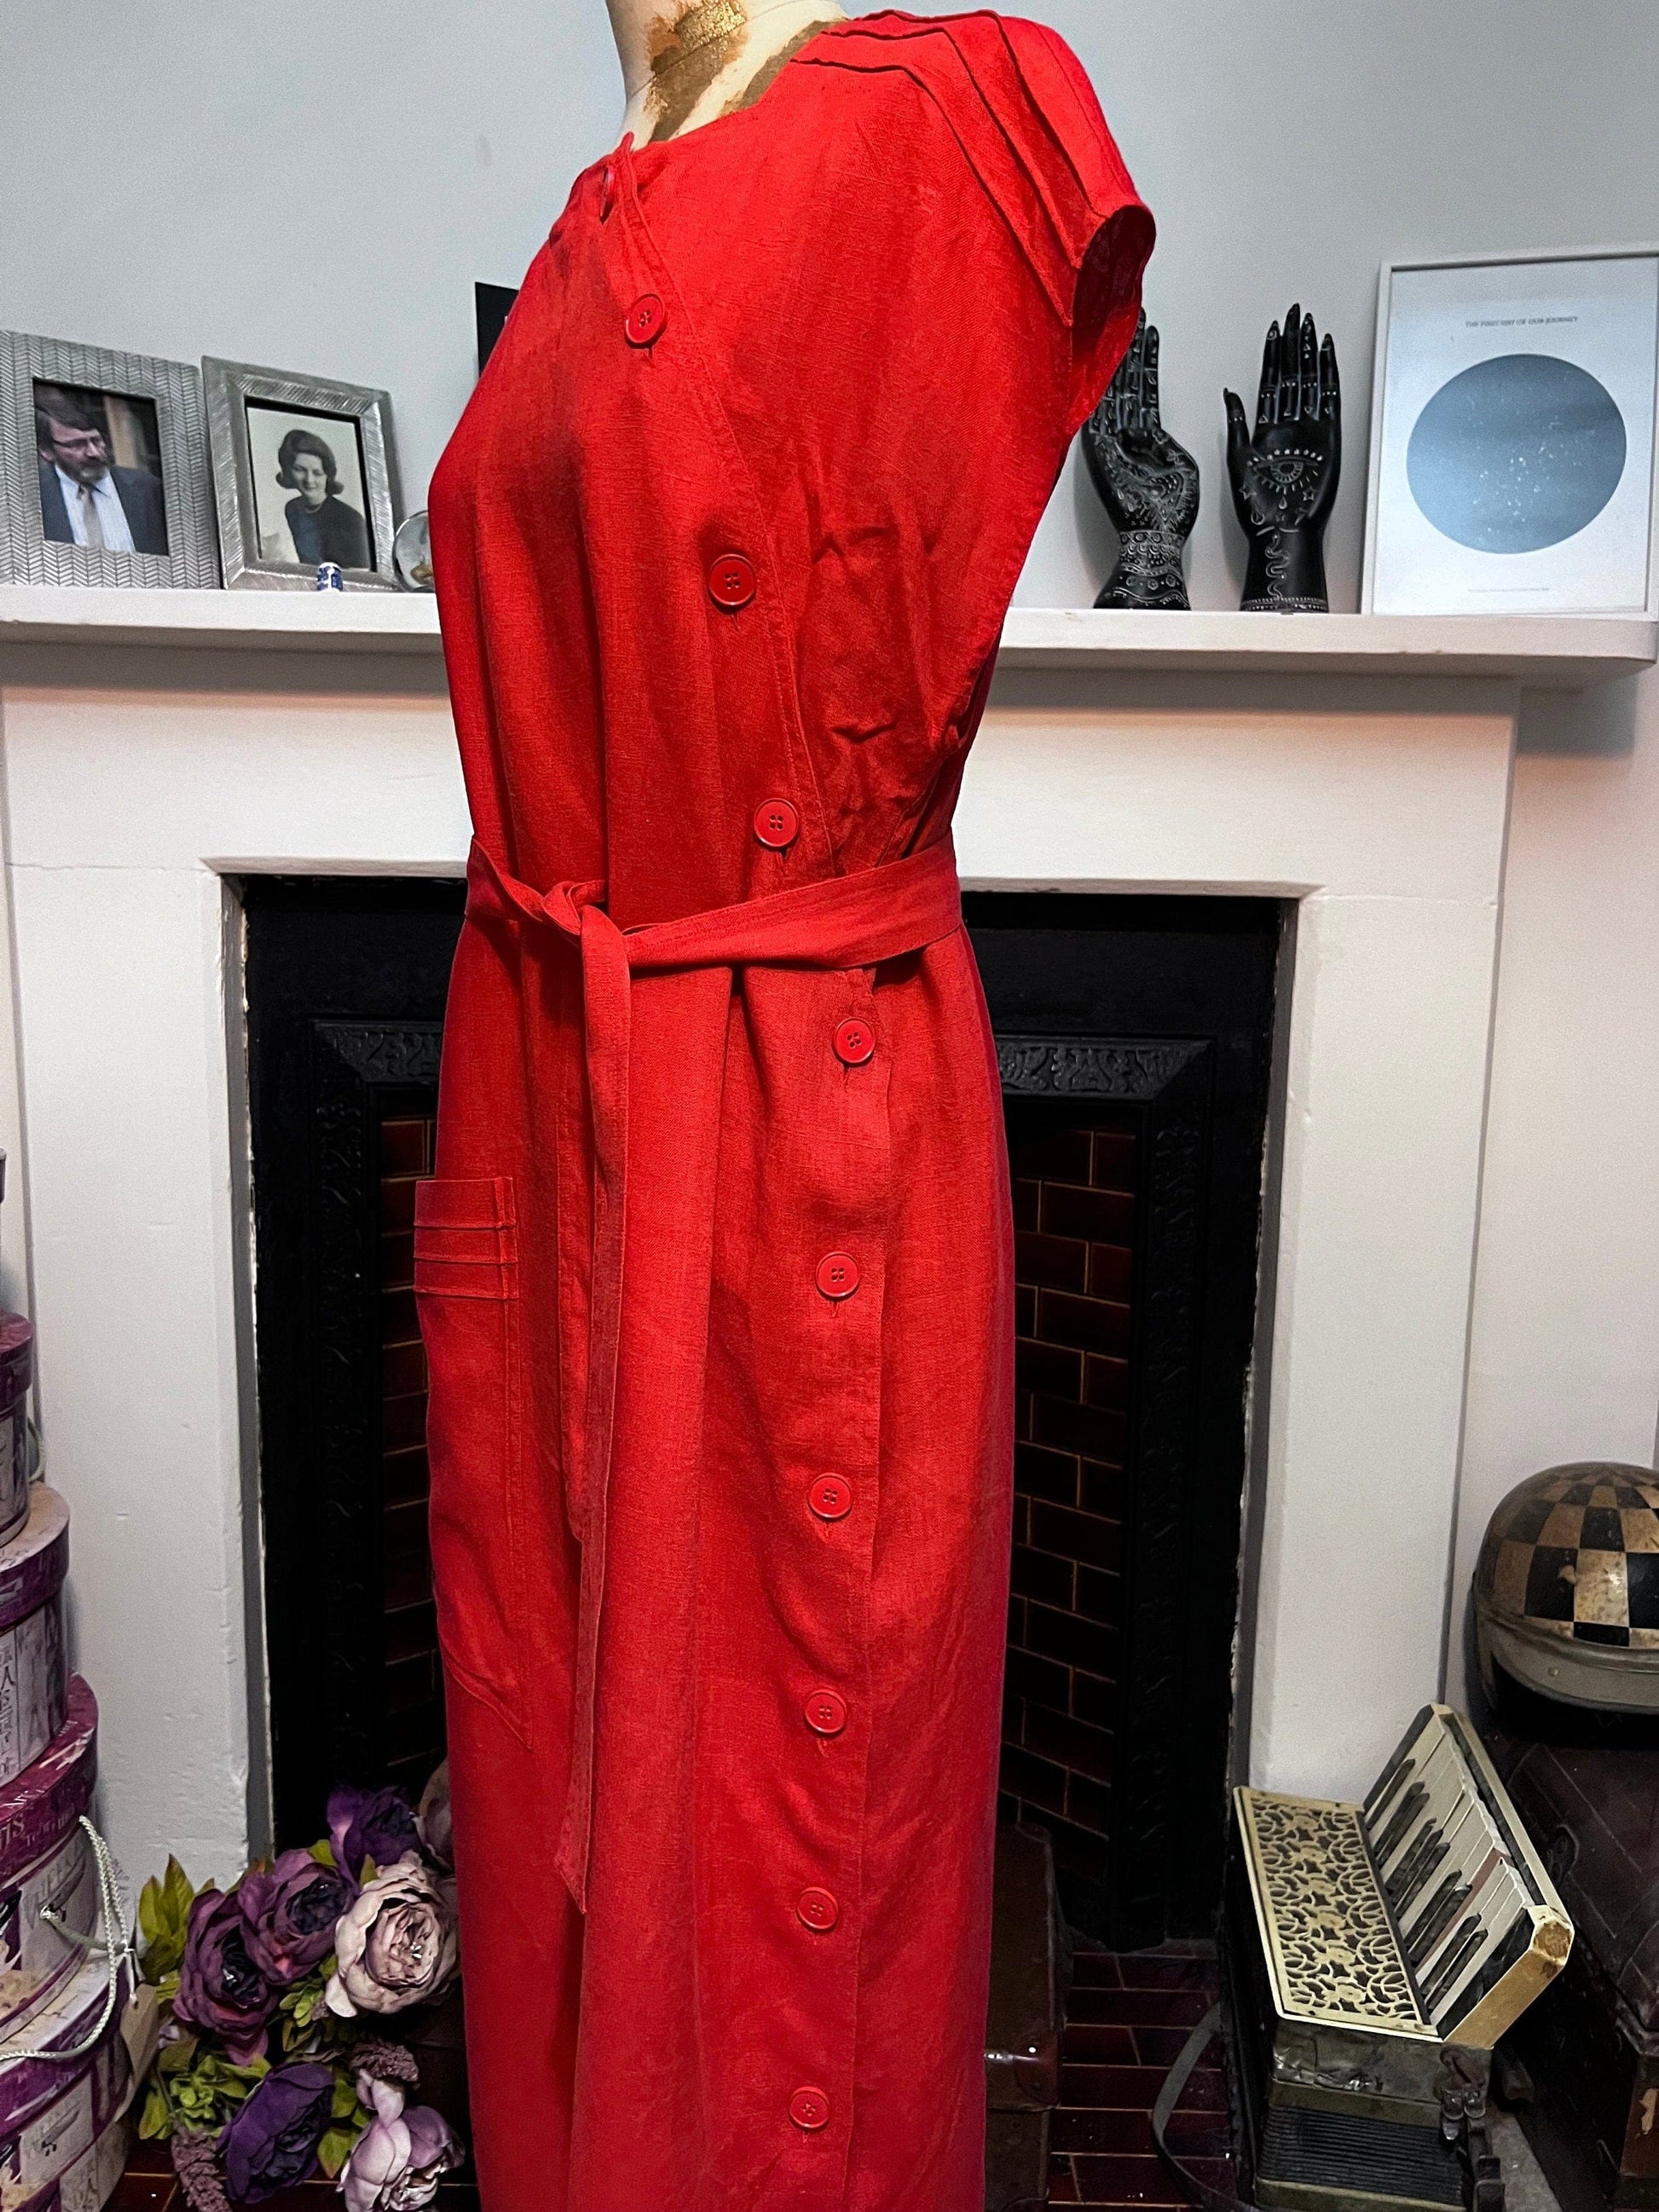 Vintage 1980s red linen asymmetrical dress vintage - Day Dress button through patch pocket UK16 red dress, vintage clothing, red dress